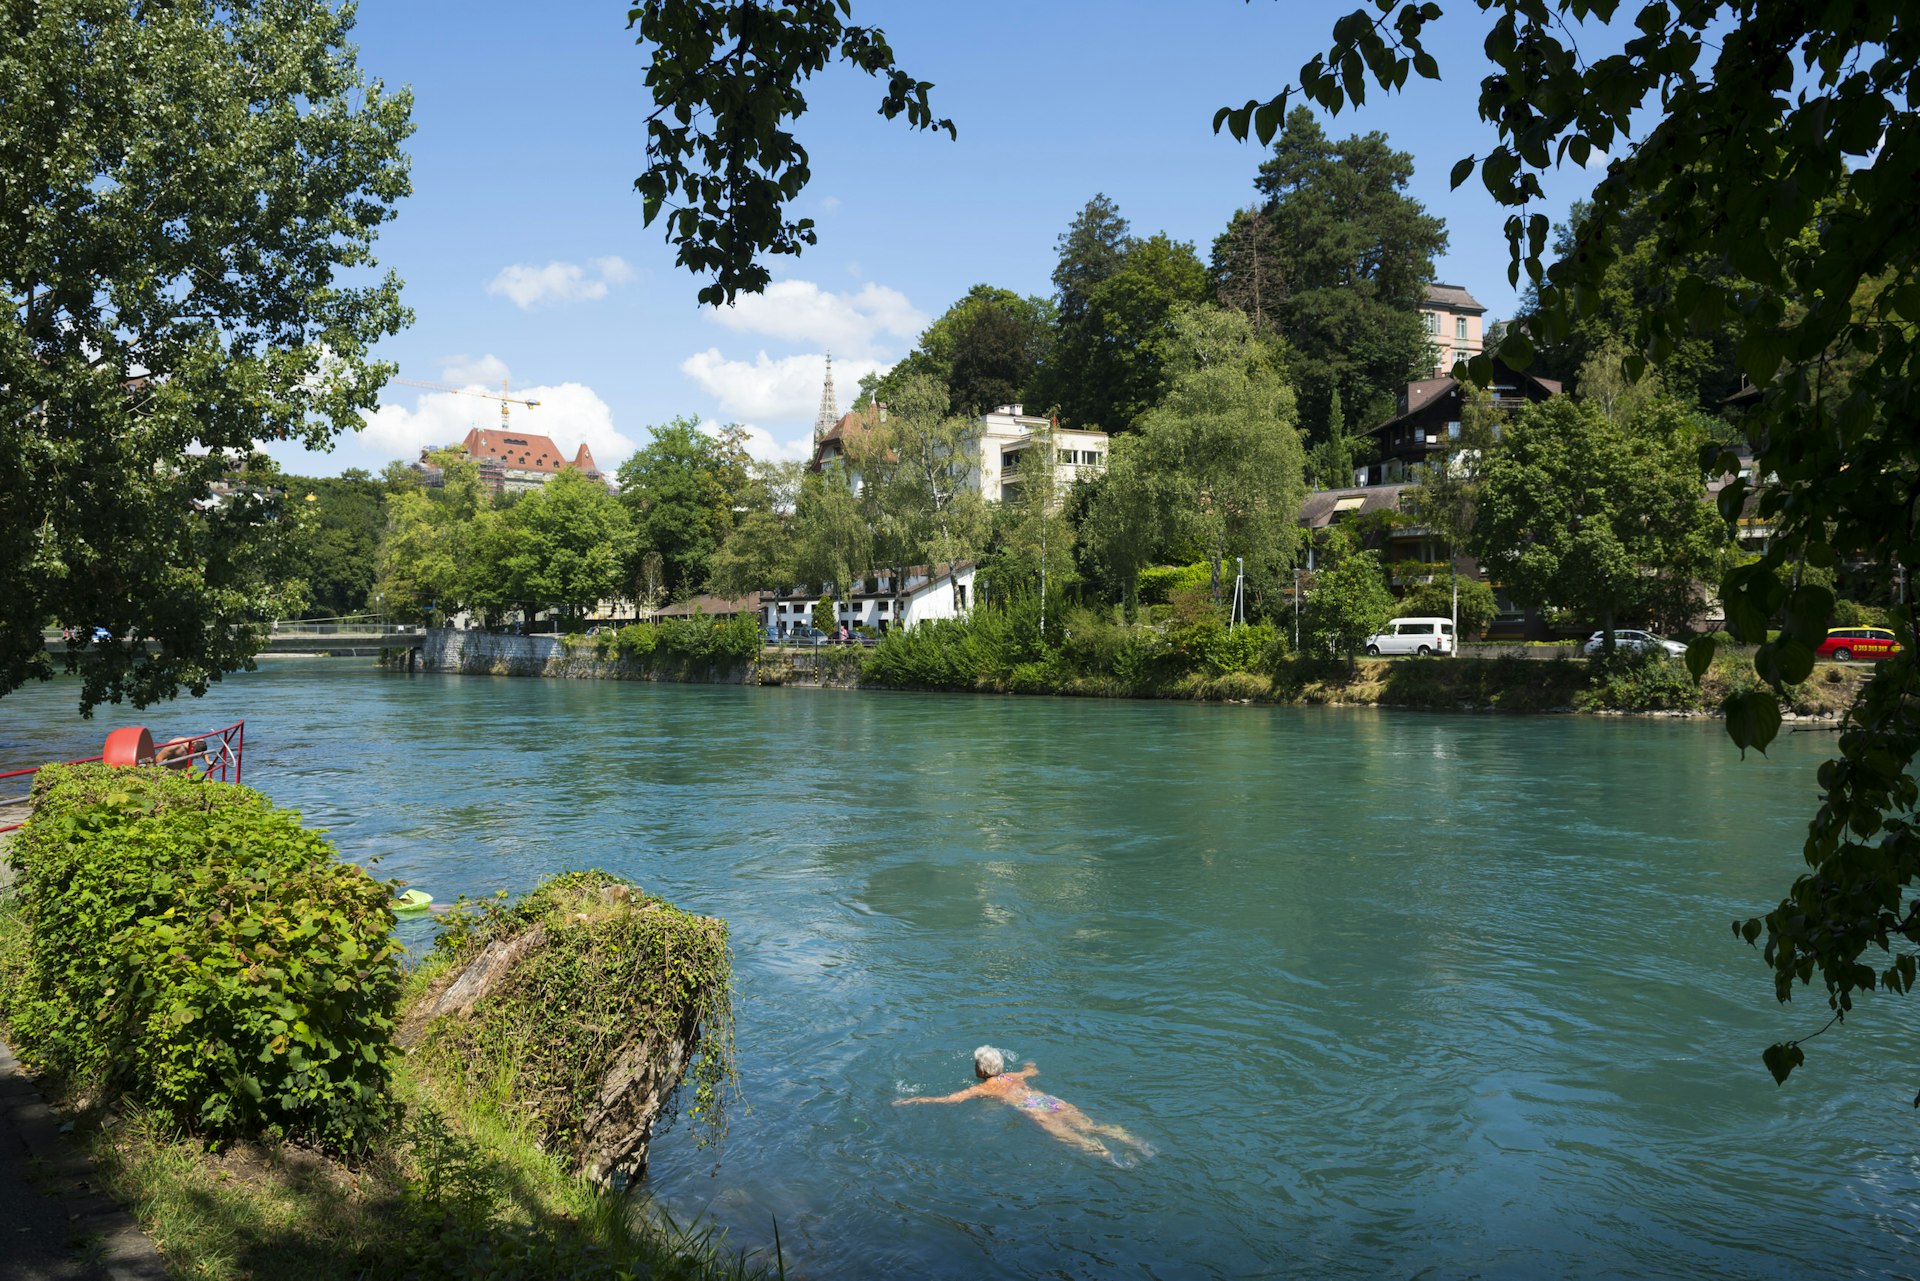 An older woman swims breaststroke near the bank of a wide river on a sunny day. On the opposite bank are buildings obscured by large trees.